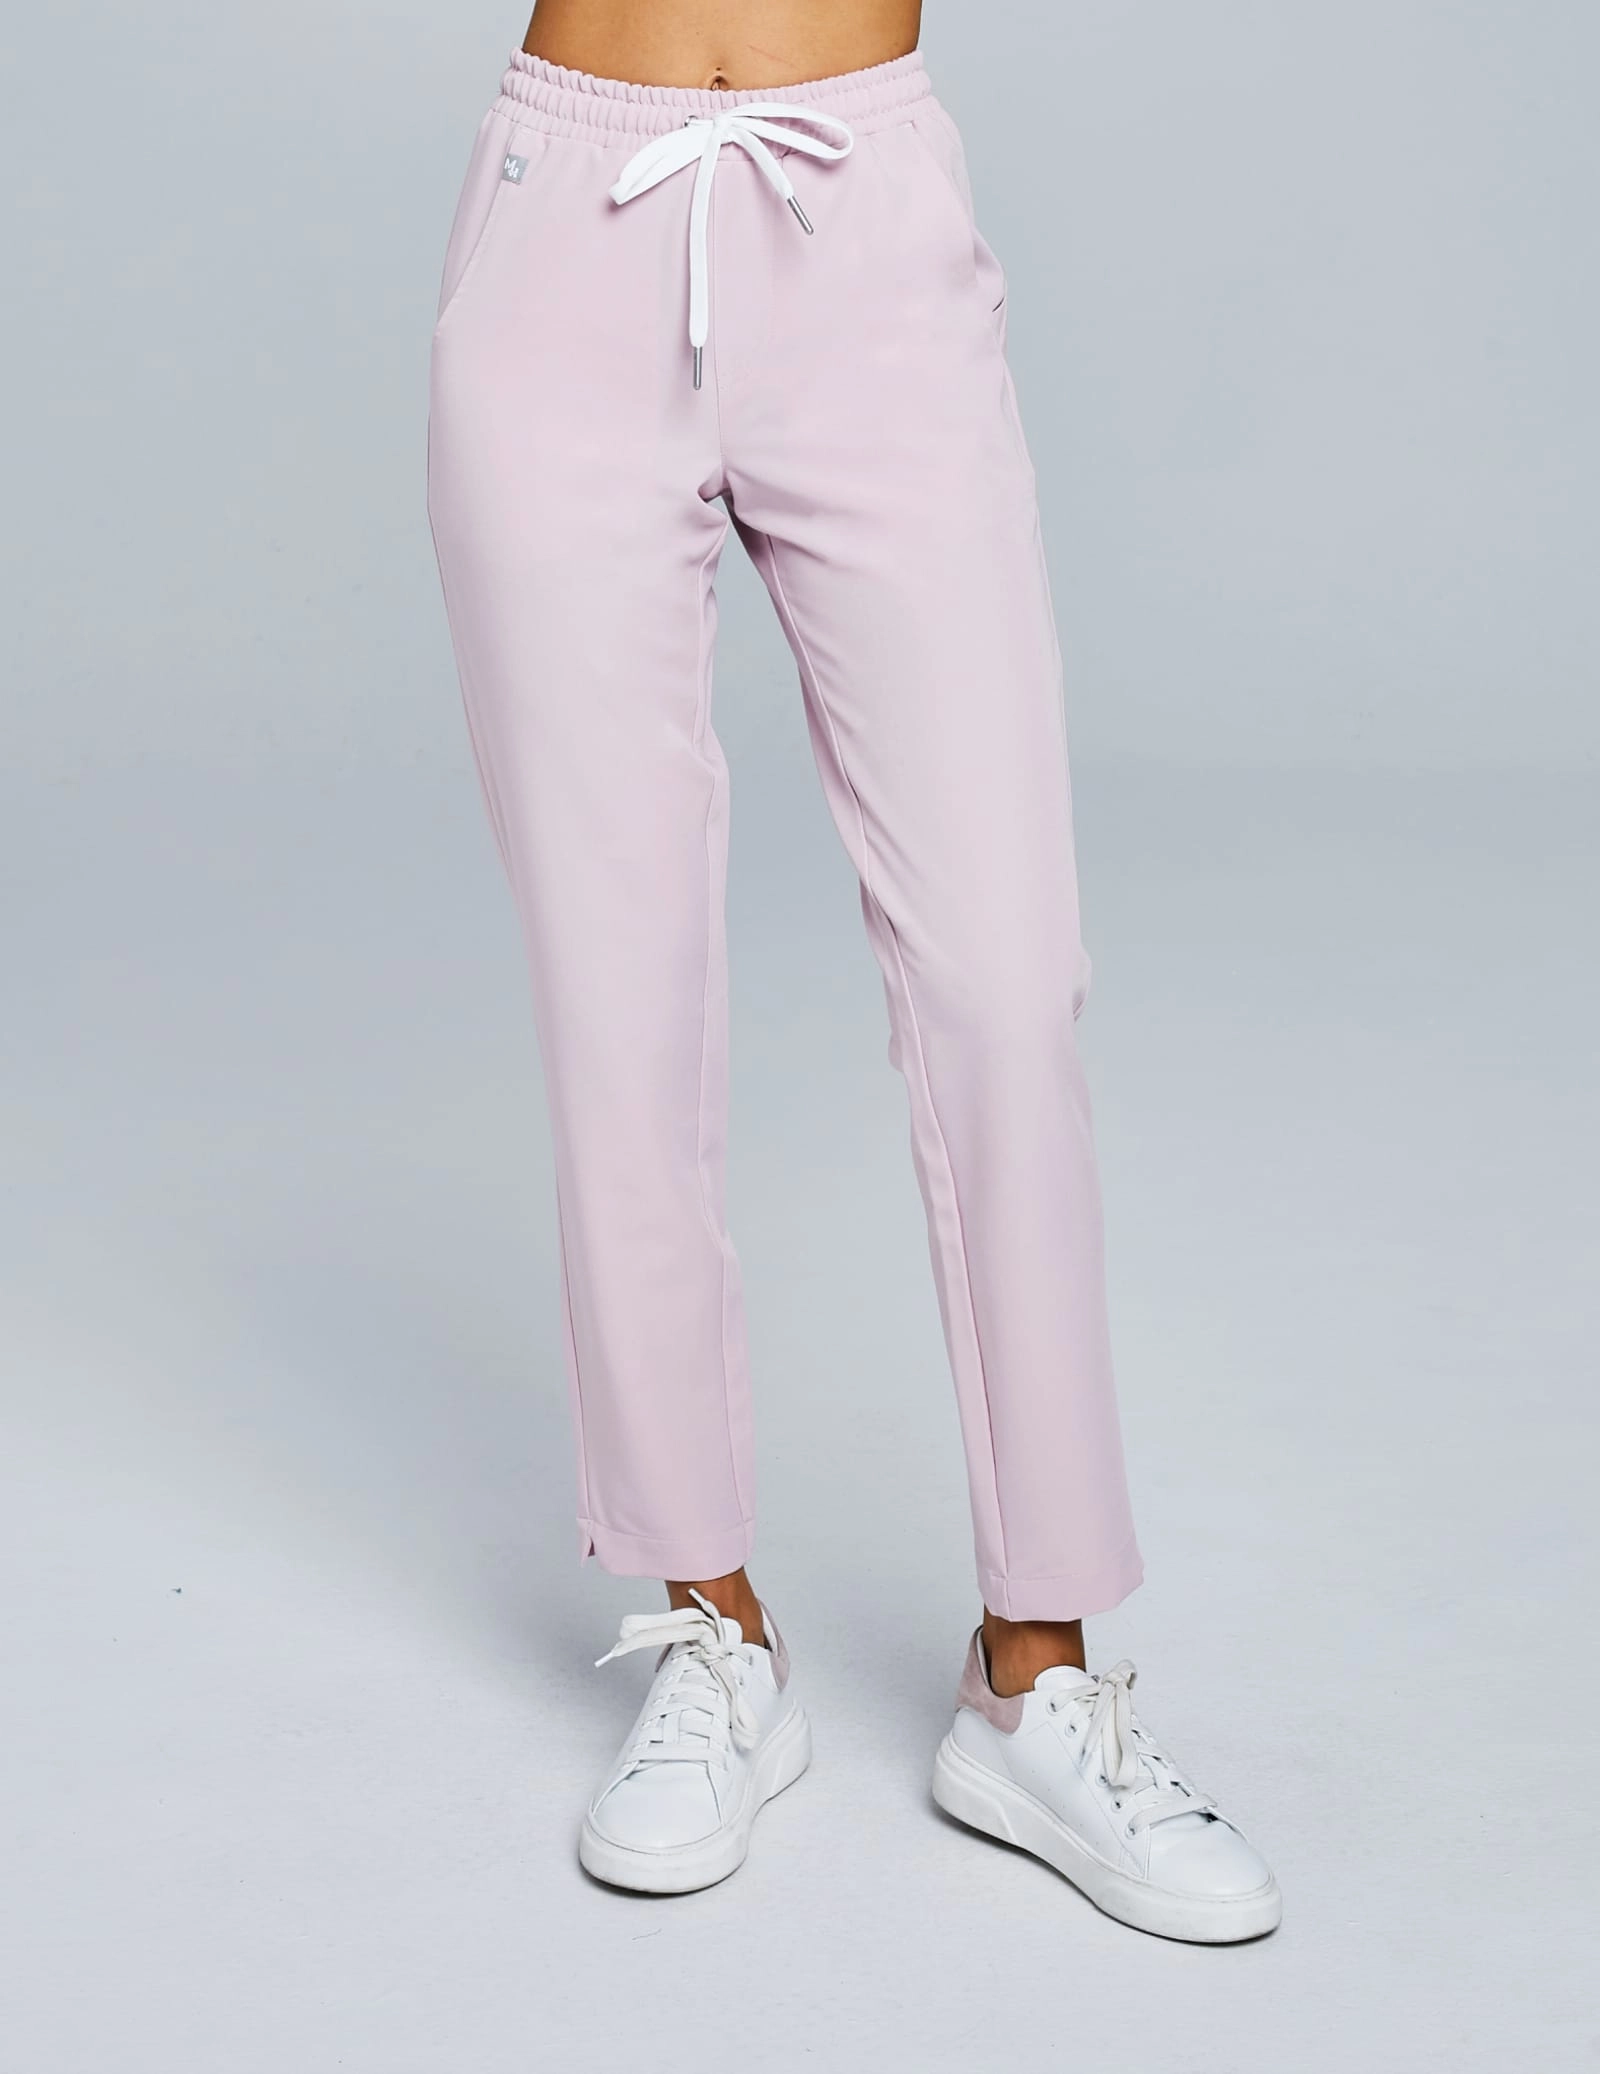 Women's Basic Trousers - BLUSH PINK OUTLET